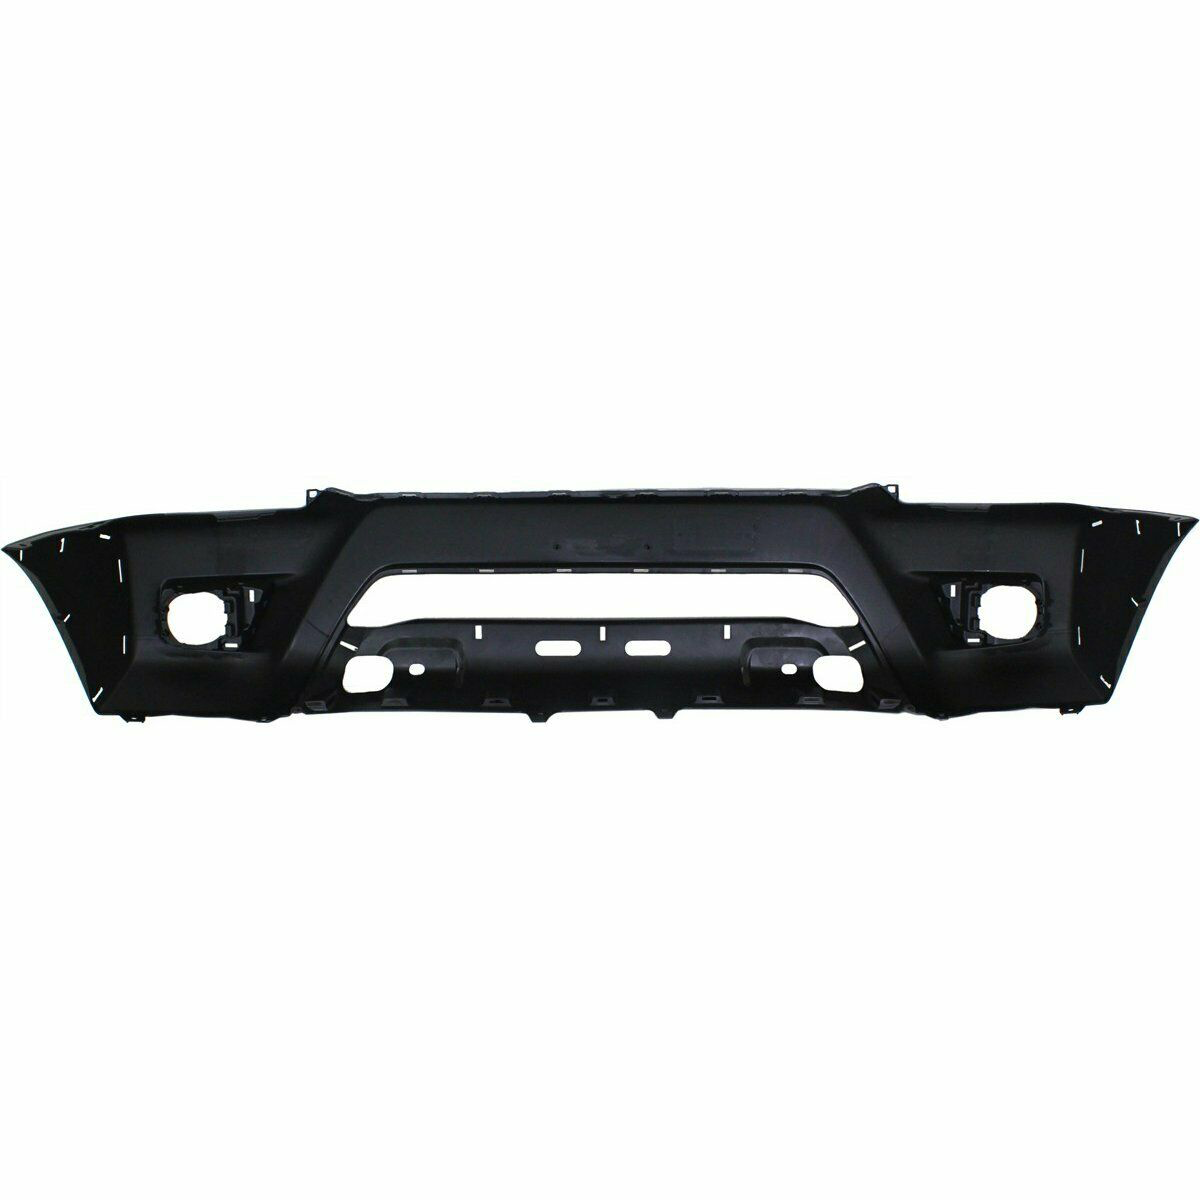 2012-2015 TOYOTA TACOMA, Front Bumper w/ Flare Holes Painted to Match